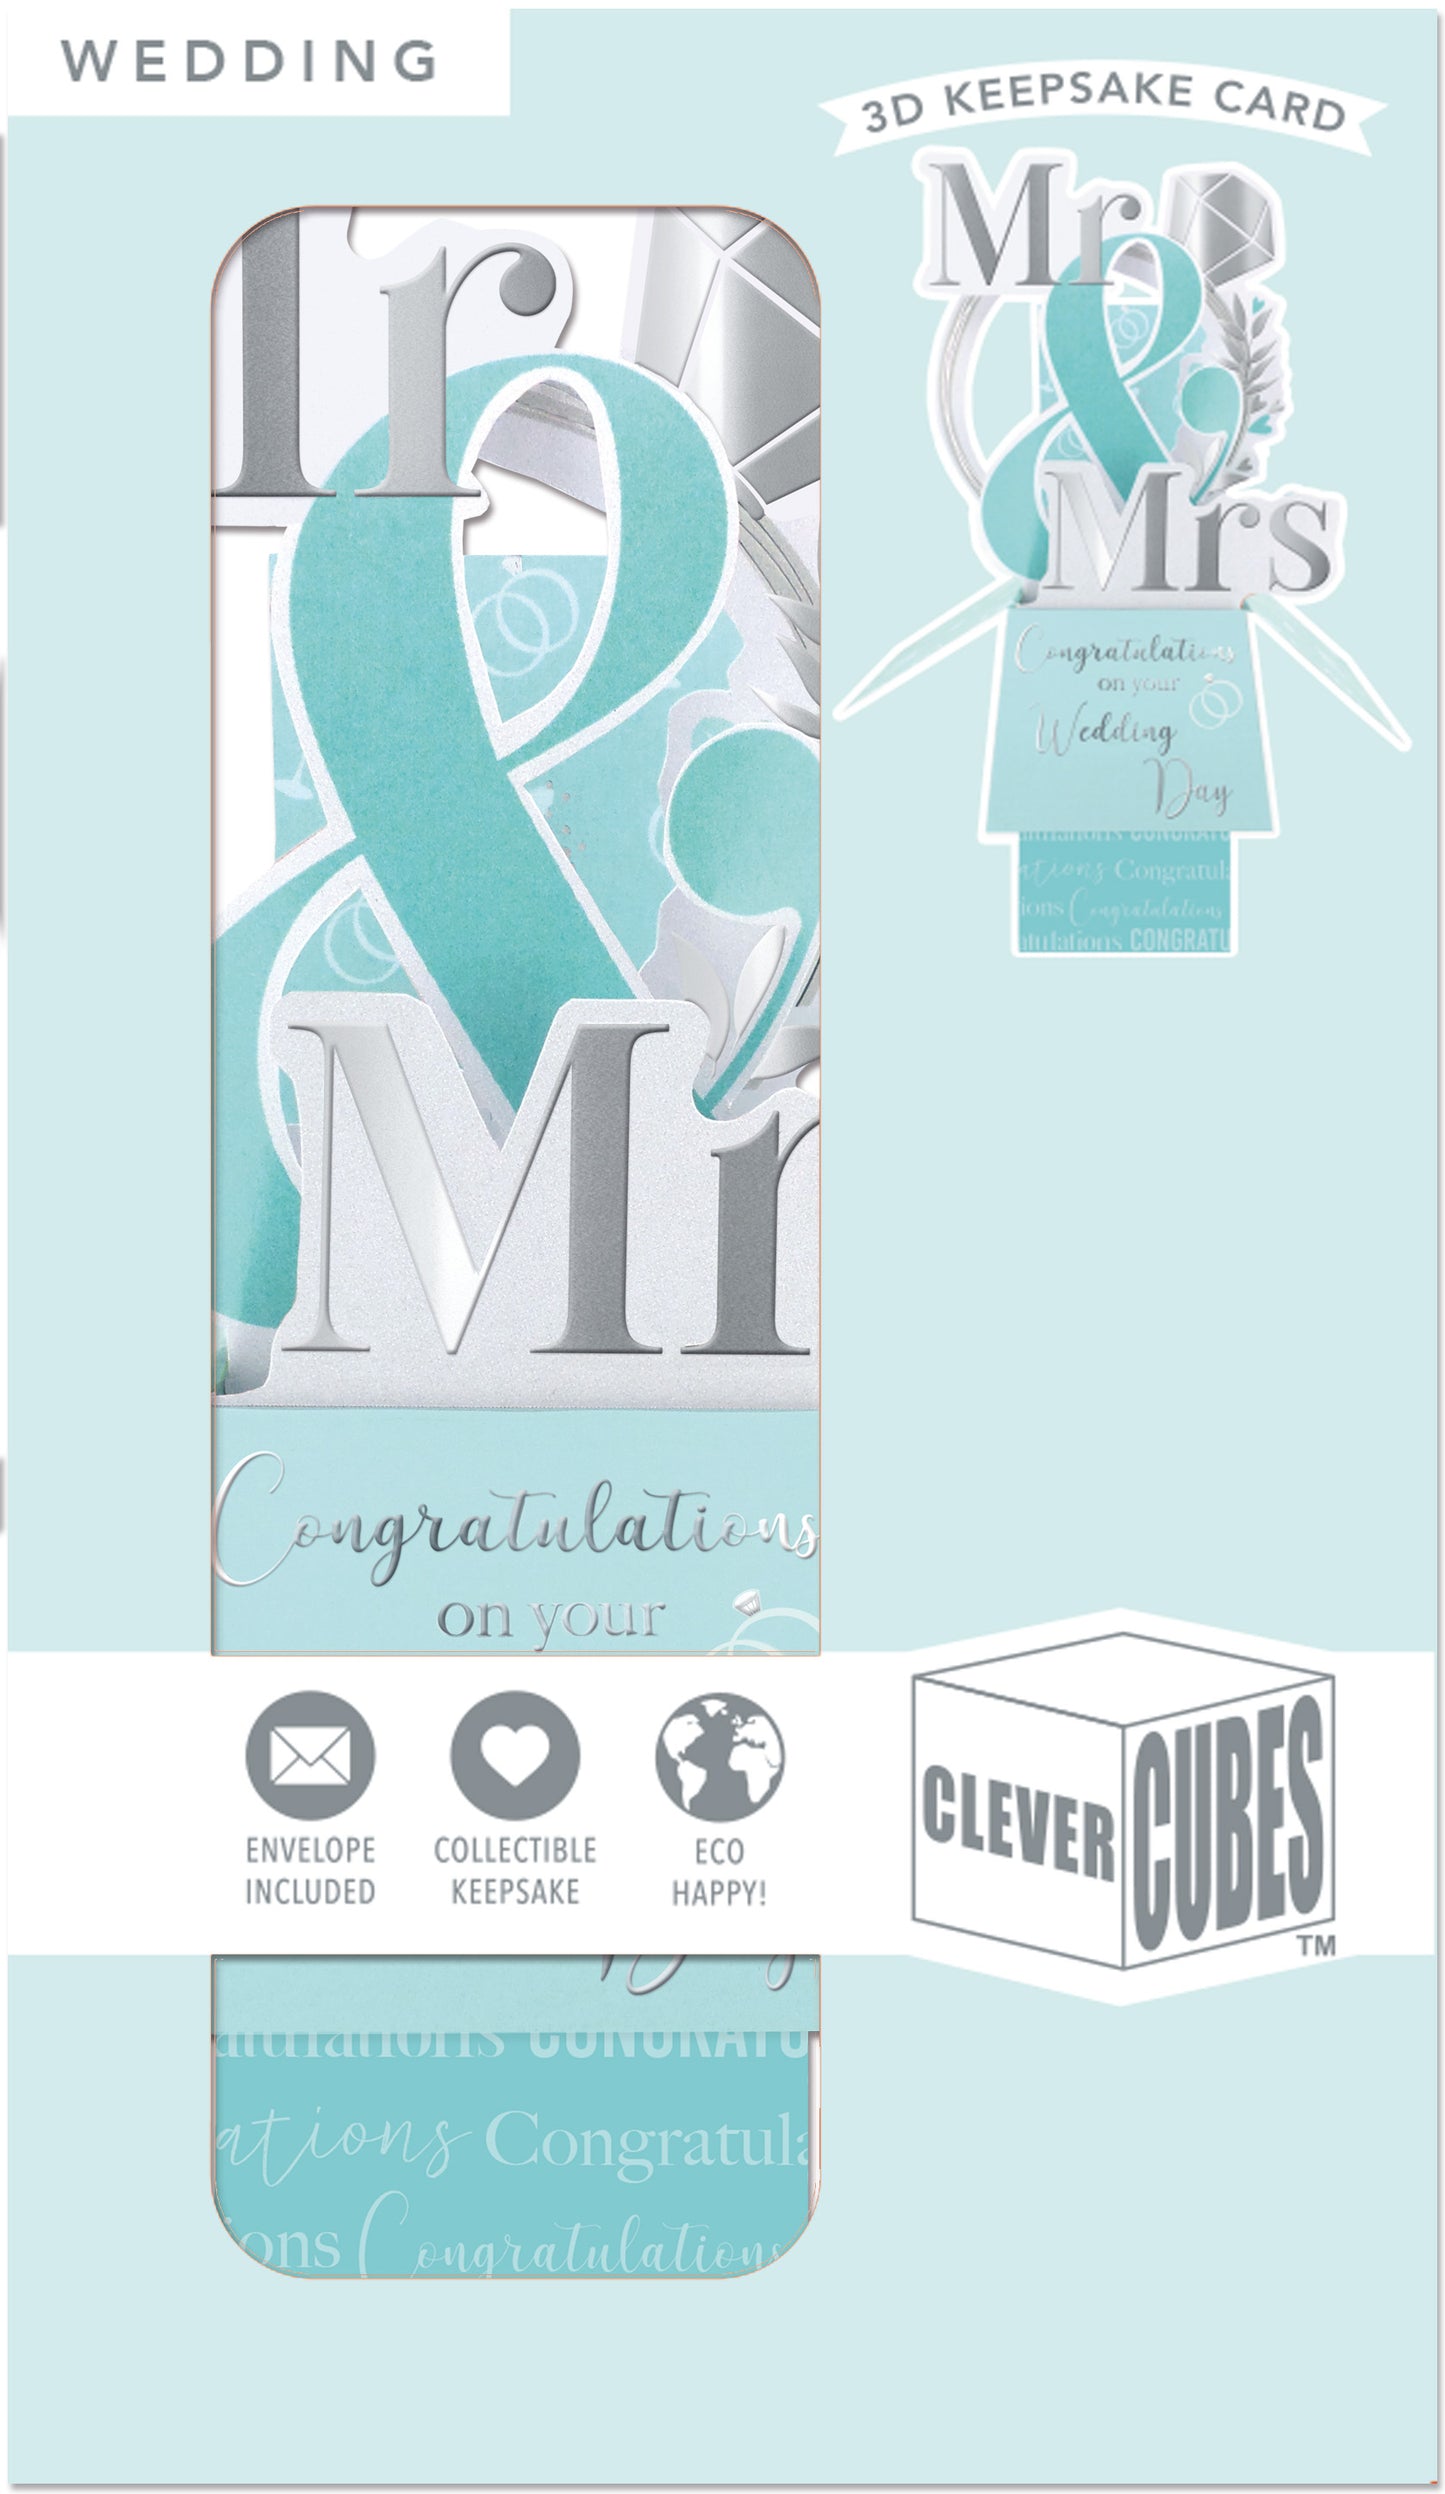 Clever Cube Mr & Mrs Forever Together! Wedding Pop Up Greeting Card